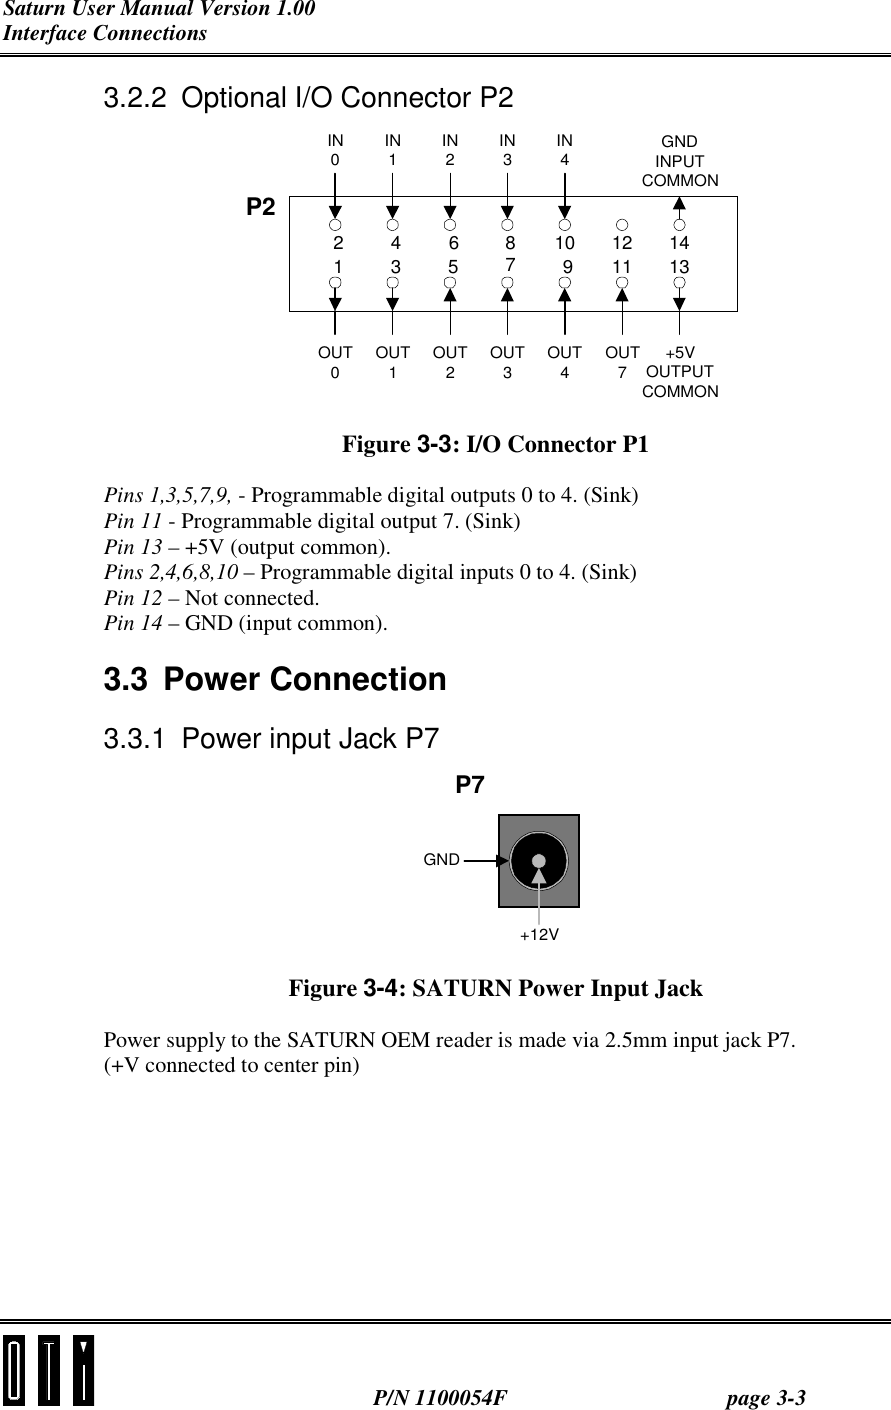 Saturn User Manual Version 1.00 Interface Connections  P/N 1100054F page 3-3 3.2.2  Optional I/O Connector P2 2413685710912111413P2OUT0OUT1OUT2OUT3OUT4OUT7+5VOUTPUTCOMMONIN0IN1IN2IN3IN4GNDINPUTCOMMON Figure 3-3: I/O Connector P1 Pins 1,3,5,7,9, - Programmable digital outputs 0 to 4. (Sink) Pin 11 - Programmable digital output 7. (Sink) Pin 13 – +5V (output common). Pins 2,4,6,8,10 – Programmable digital inputs 0 to 4. (Sink) Pin 12 – Not connected. Pin 14 – GND (input common). 3.3  Power Connection  3.3.1  Power input Jack P7 GND+12VP7 Figure 3-4: SATURN Power Input Jack Power supply to the SATURN OEM reader is made via 2.5mm input jack P7. (+V connected to center pin)  